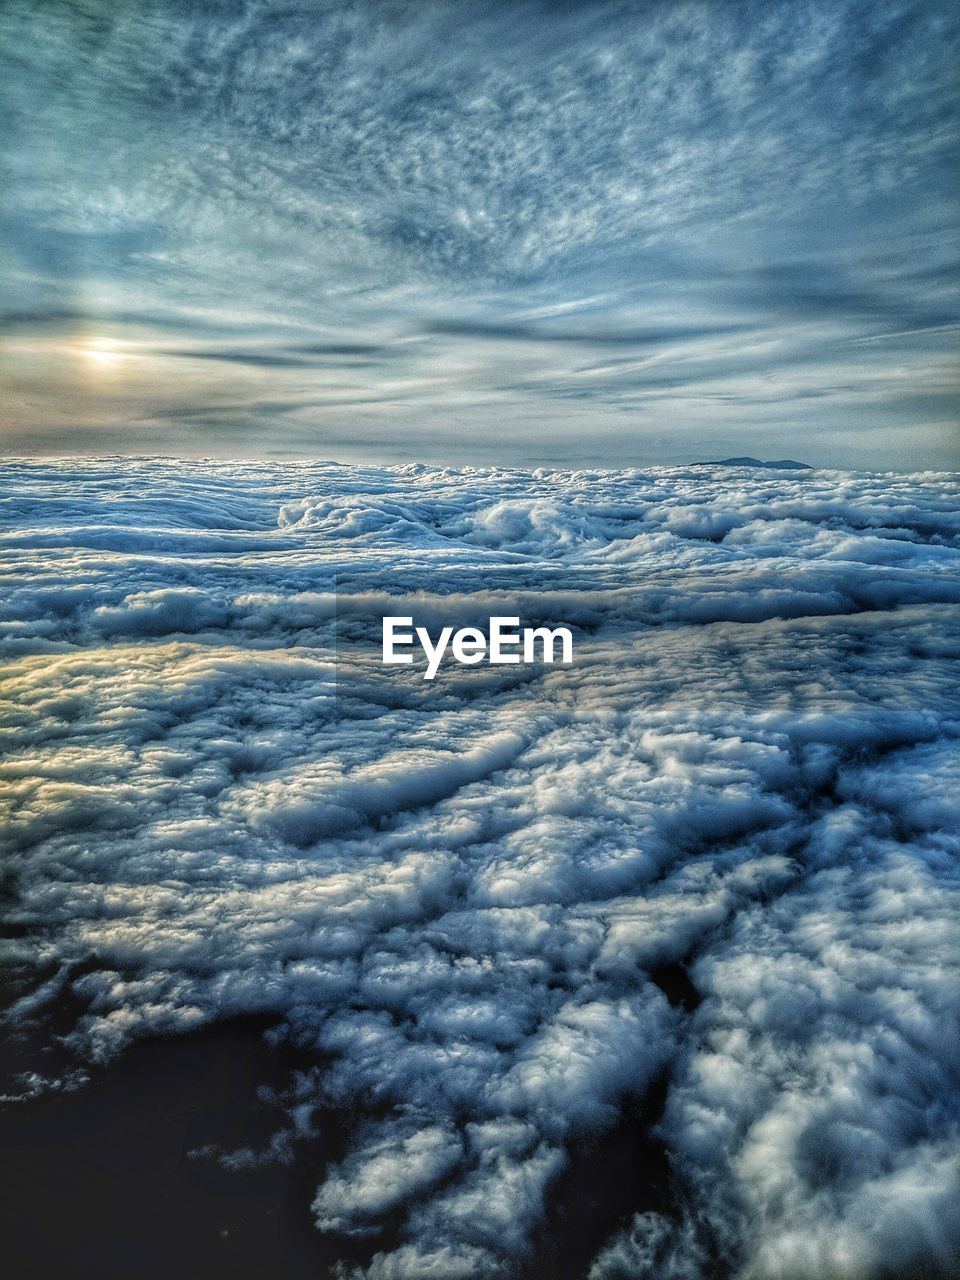 AERIAL VIEW OF CLOUDS OVER LANDSCAPE